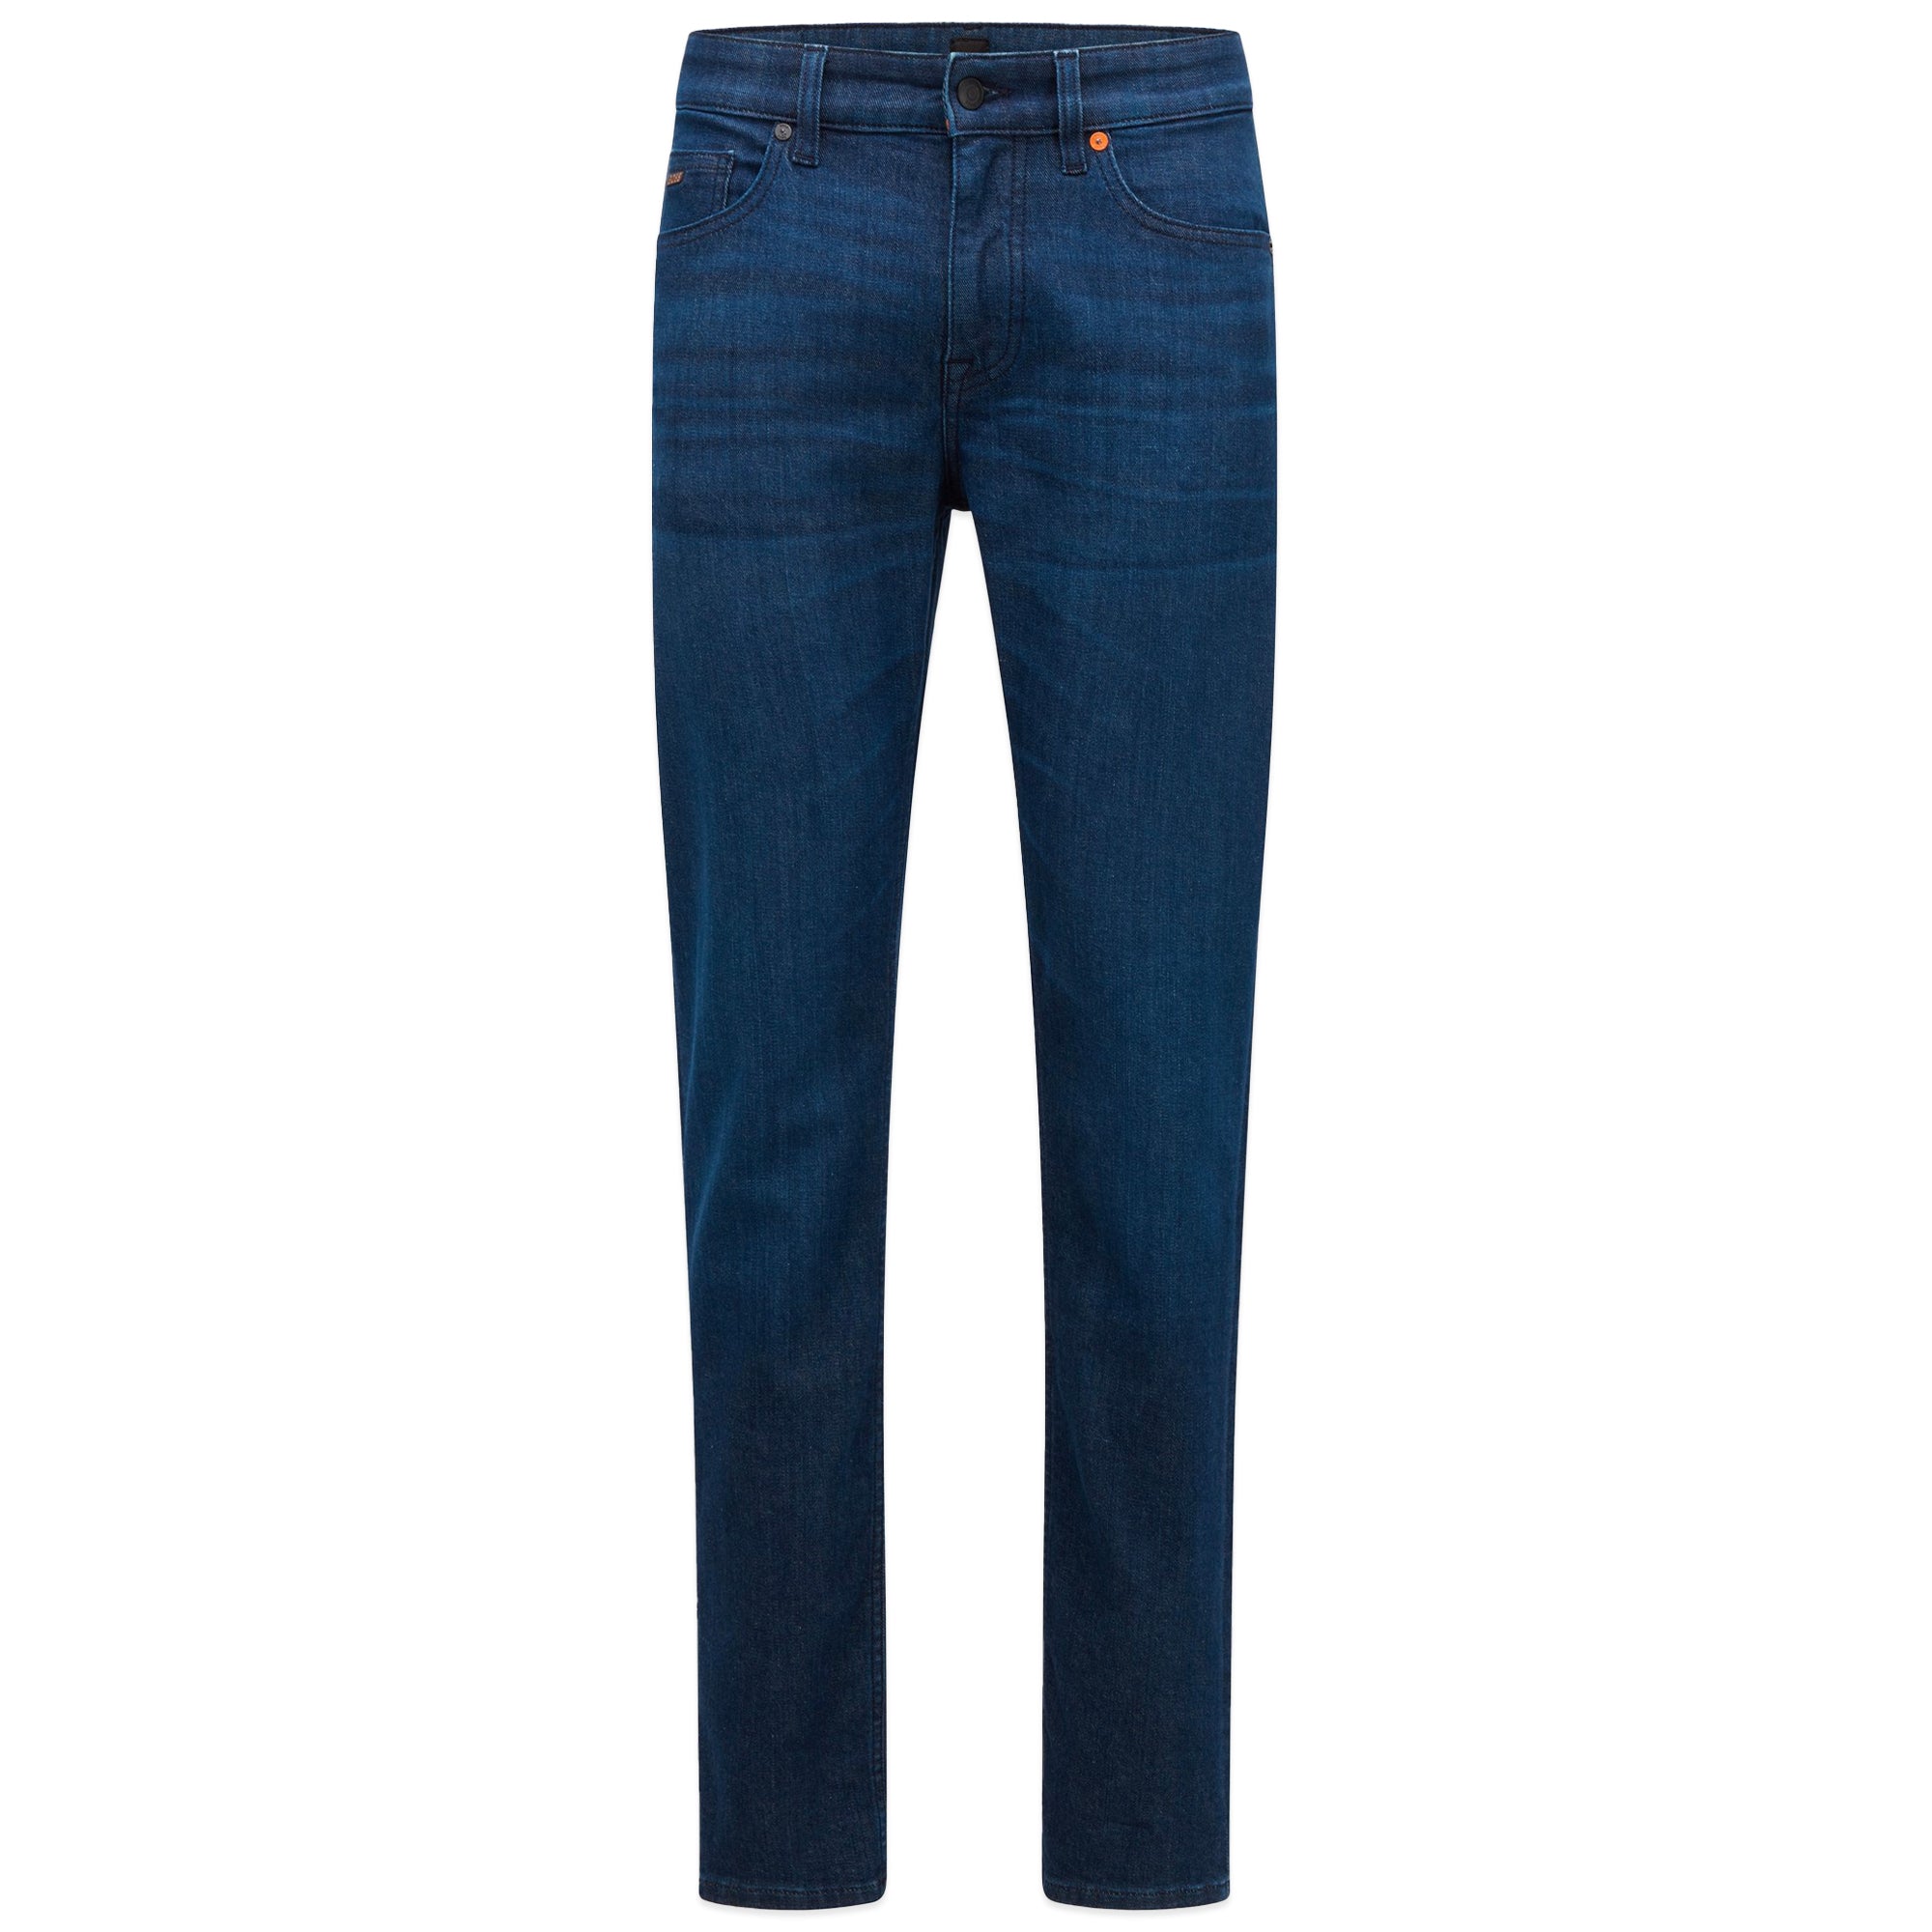 Boss Delaware Slim Fit Jeans - End on End Stretch